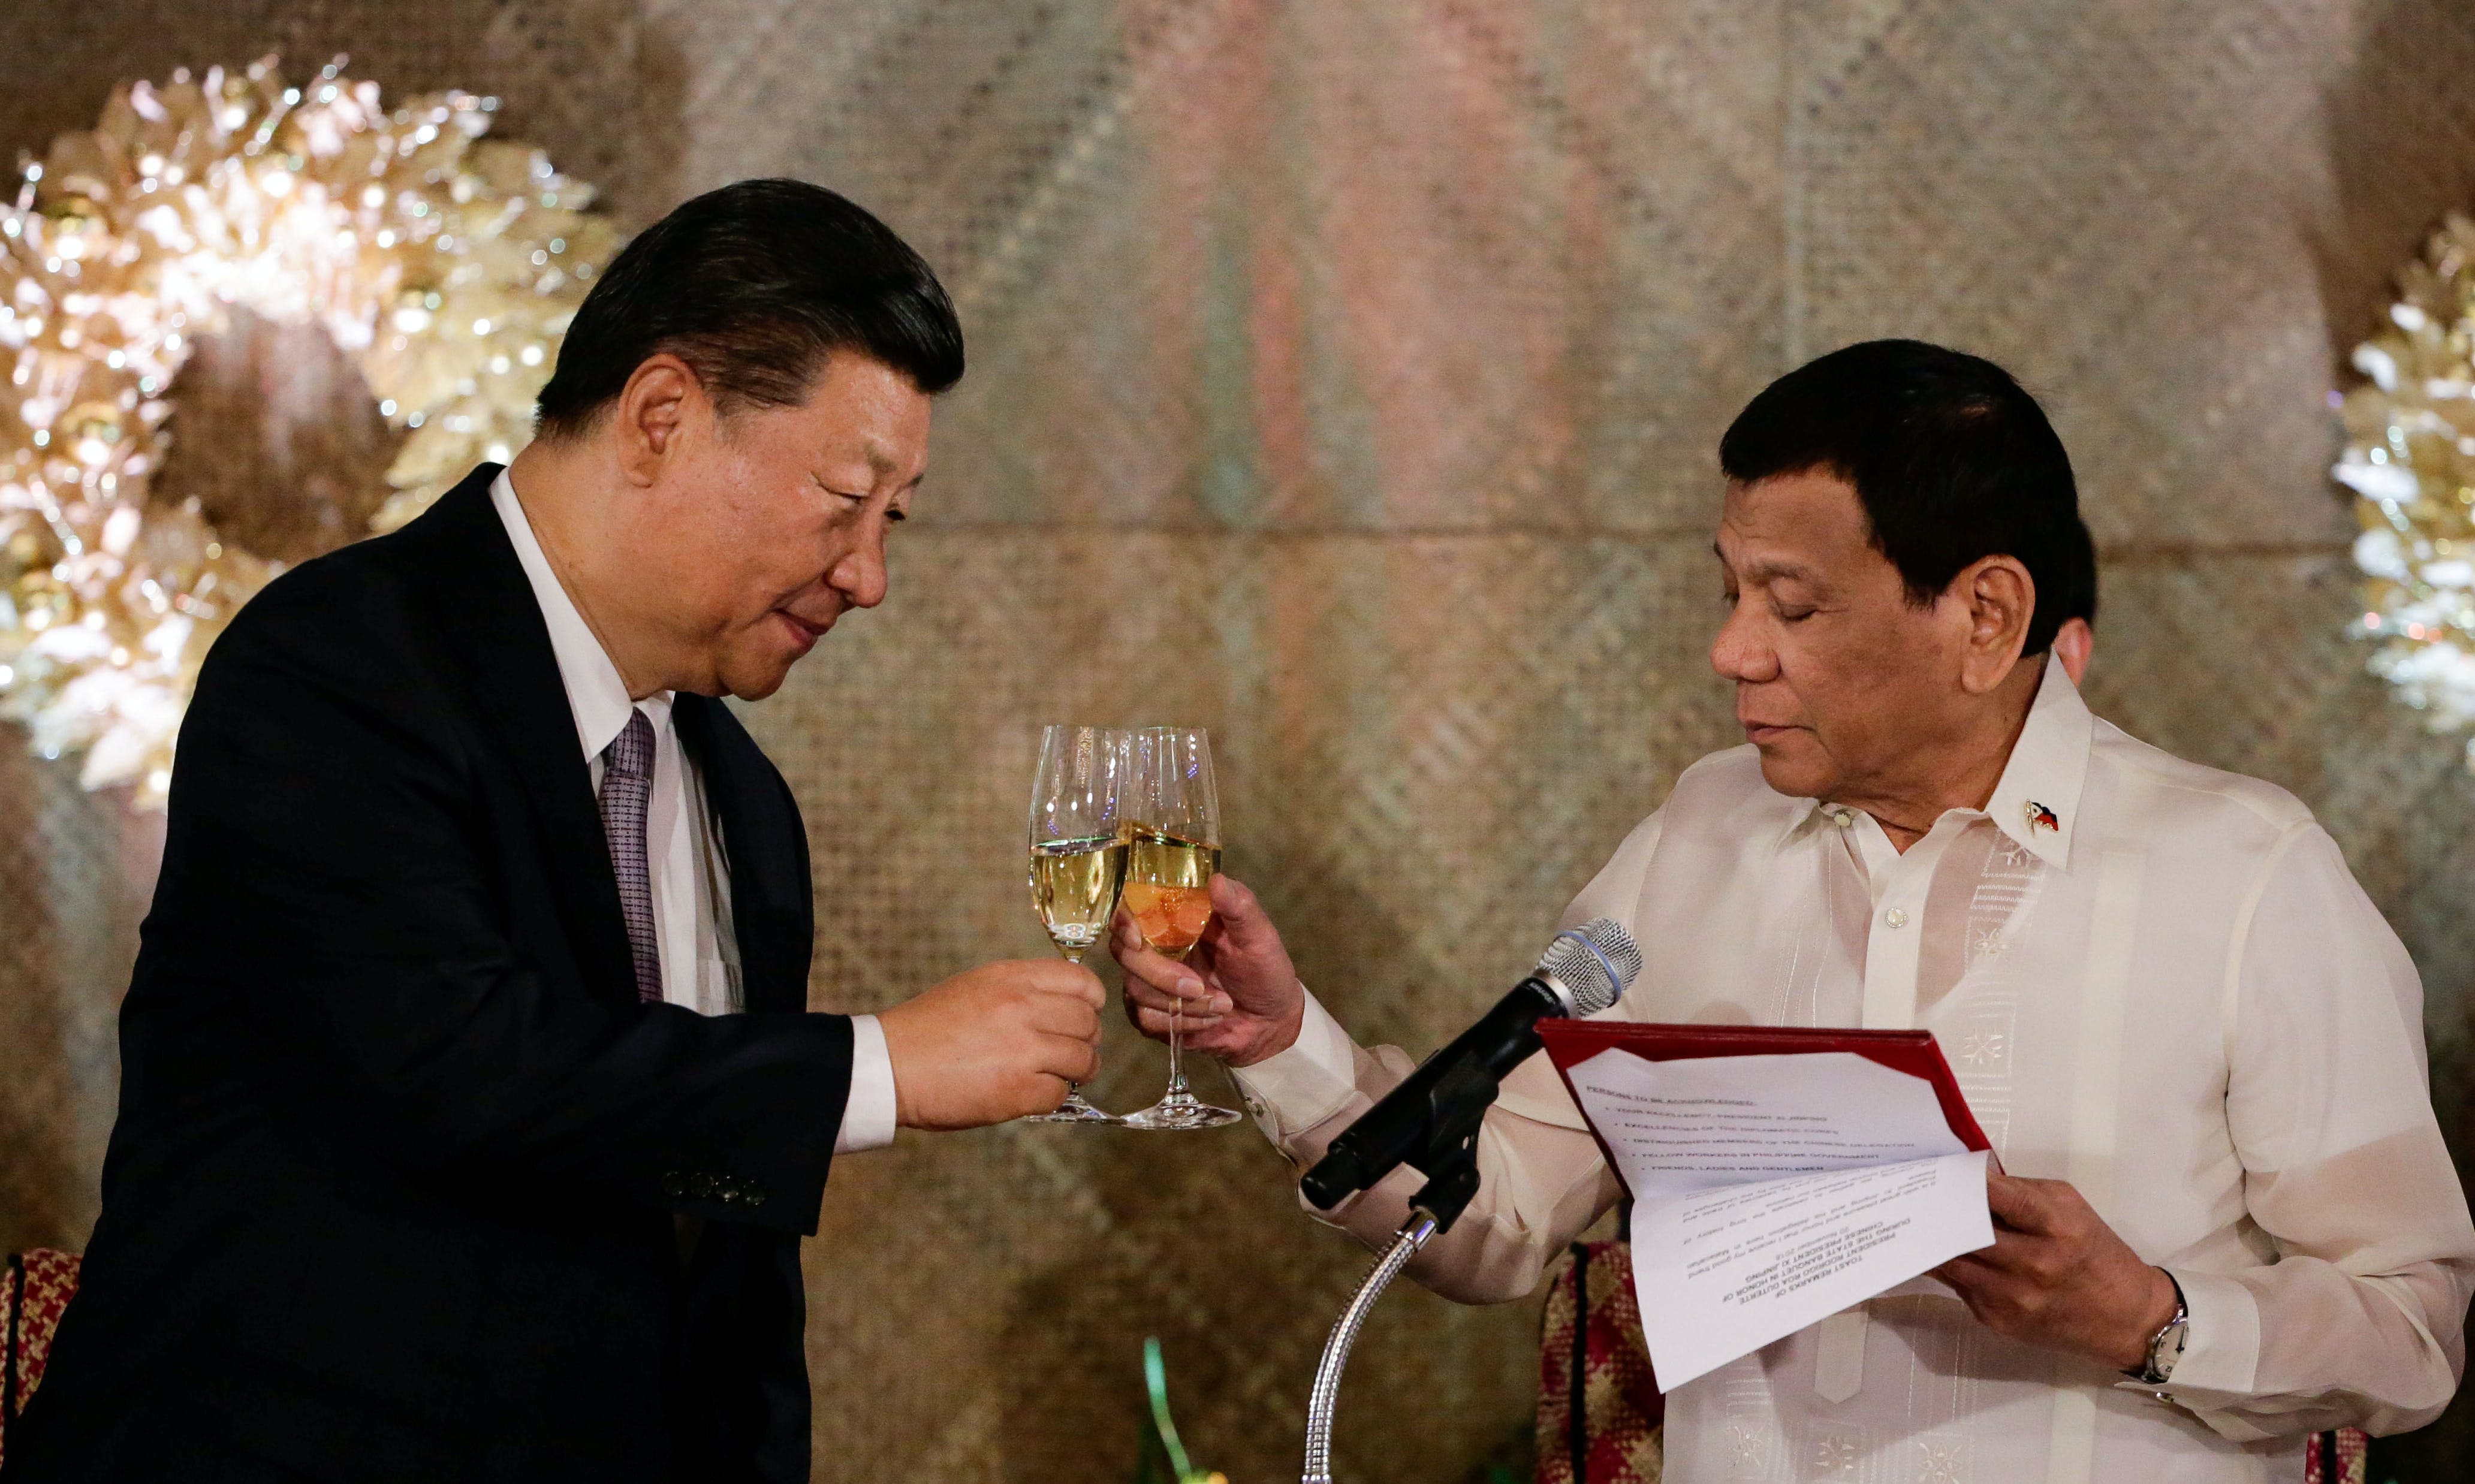 Post Mortem: Xi Jinping Leaves a Permanent Stain on the Philippines